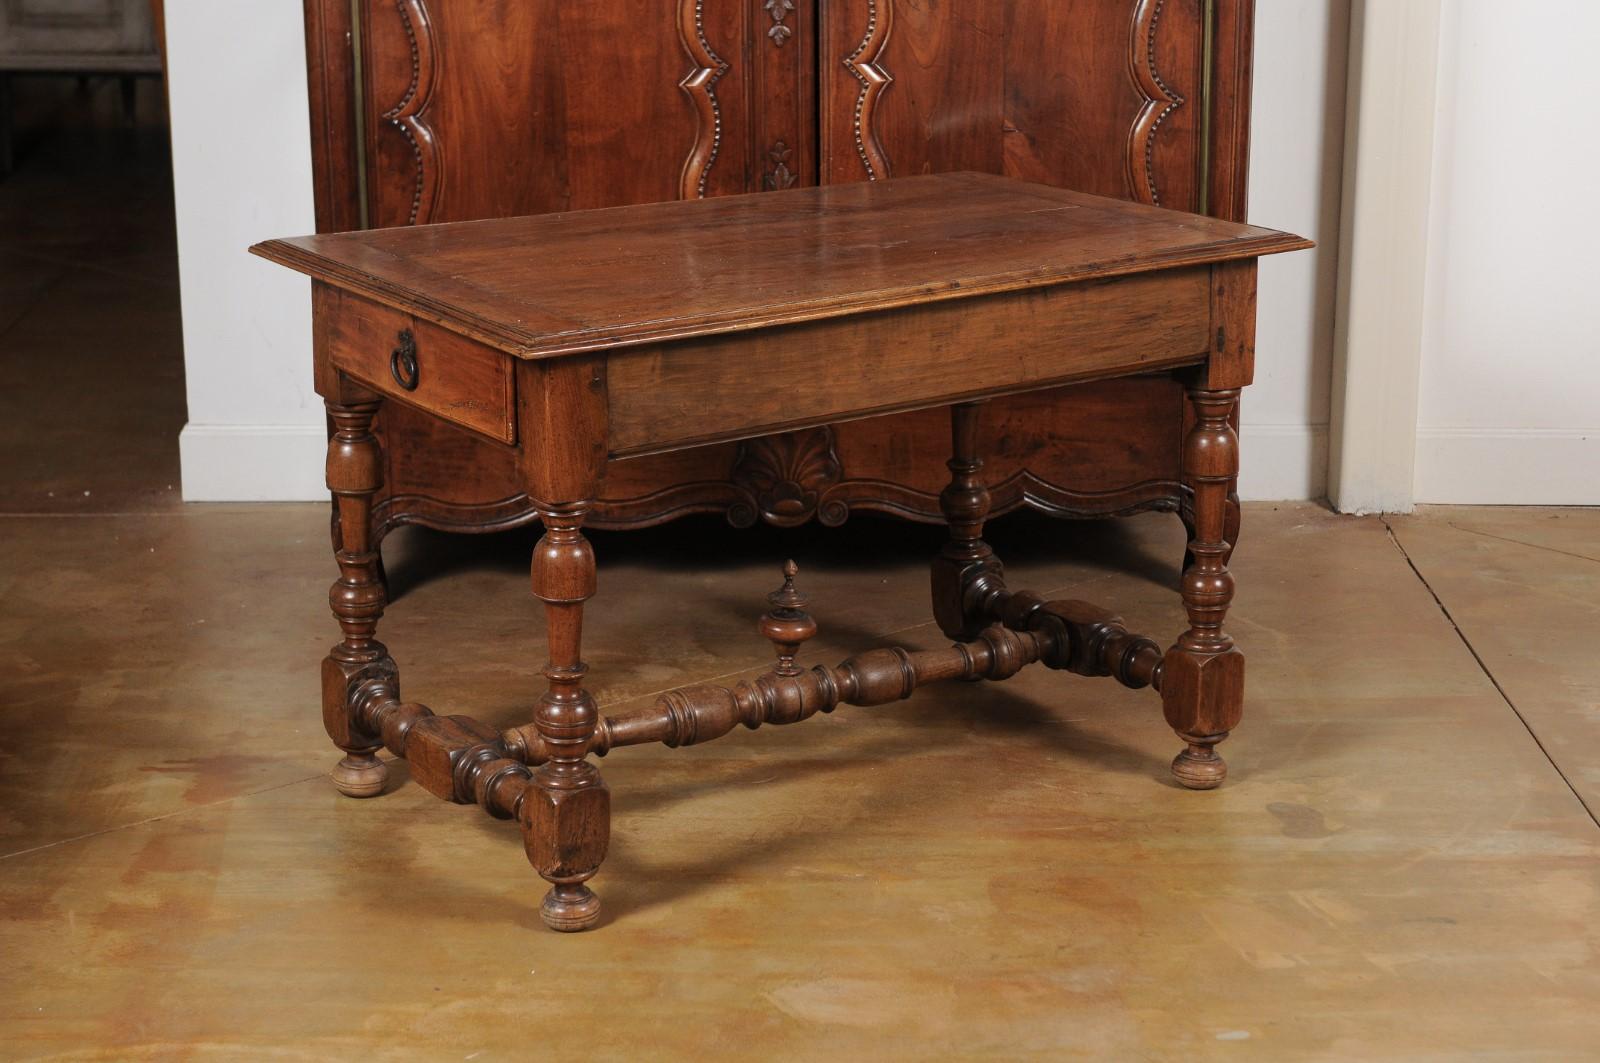 A French Louis XIII style cherry table from the mid-19th century with lateral drawer, turned legs and carved finial. Created in France at the beginning of the reign of Napoleon III's reign, this cherry table showcases the stylistic characteristics